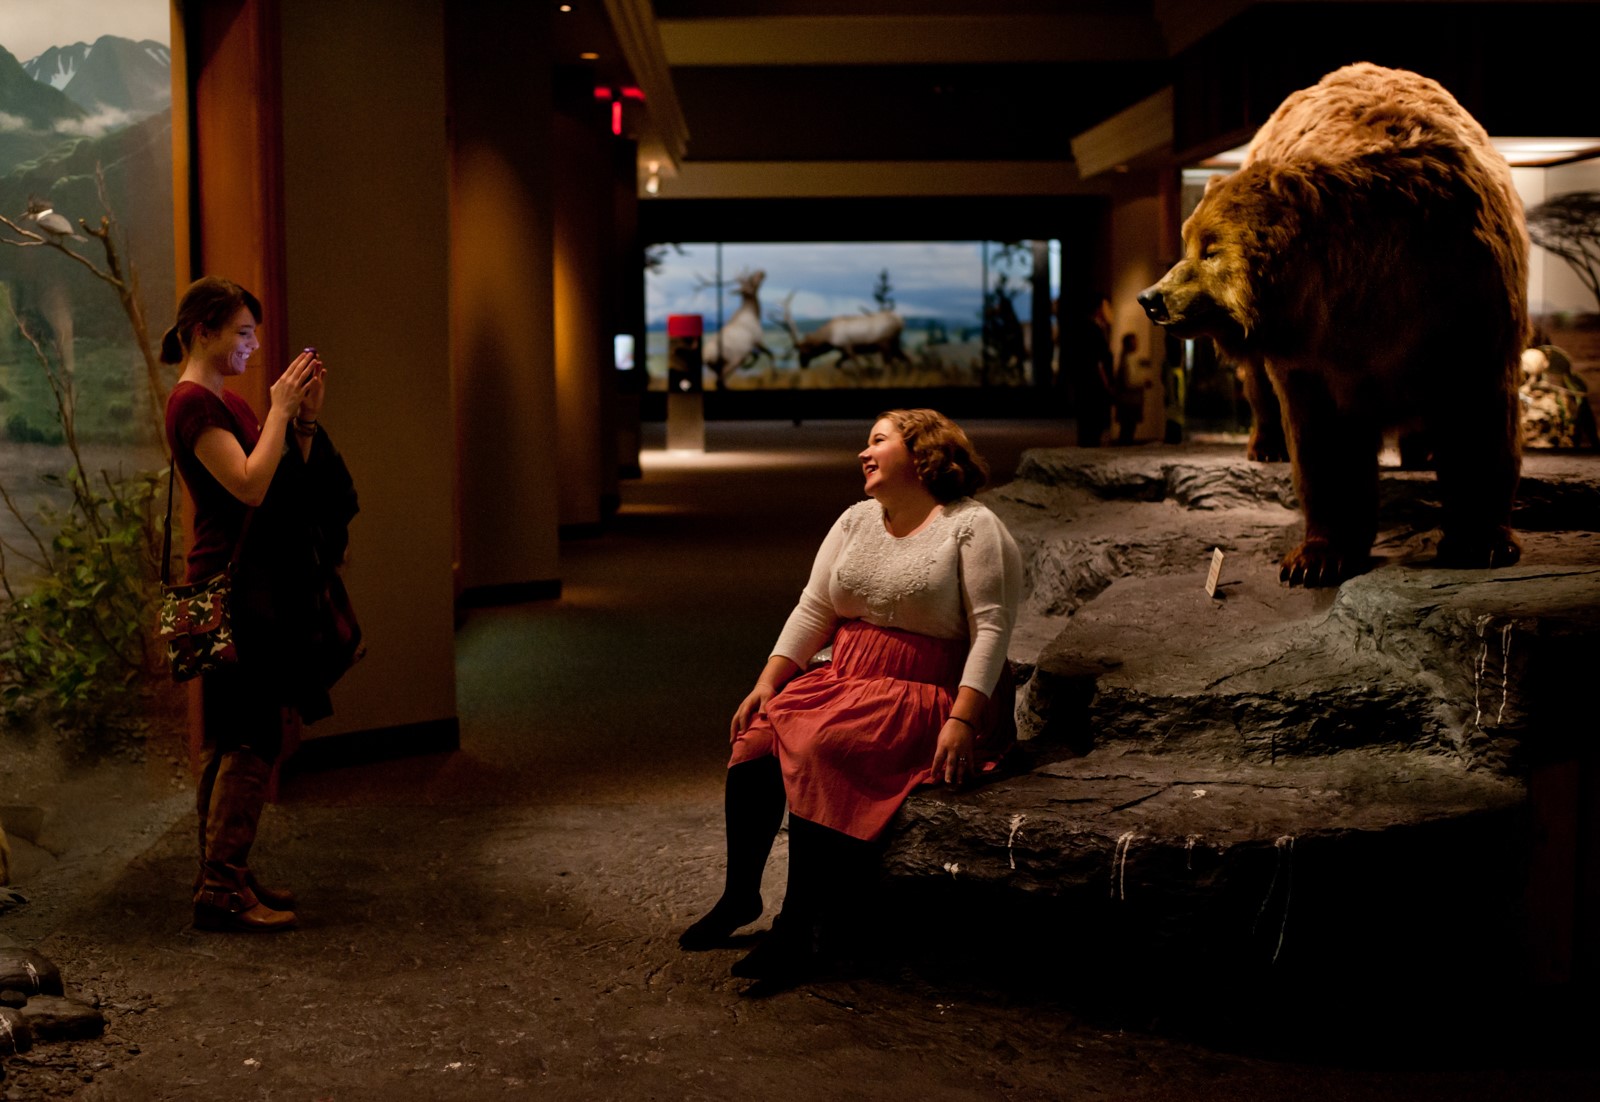 A woman poses for a picture in front of a taxidermy bear in the Carnegie Museum of History.